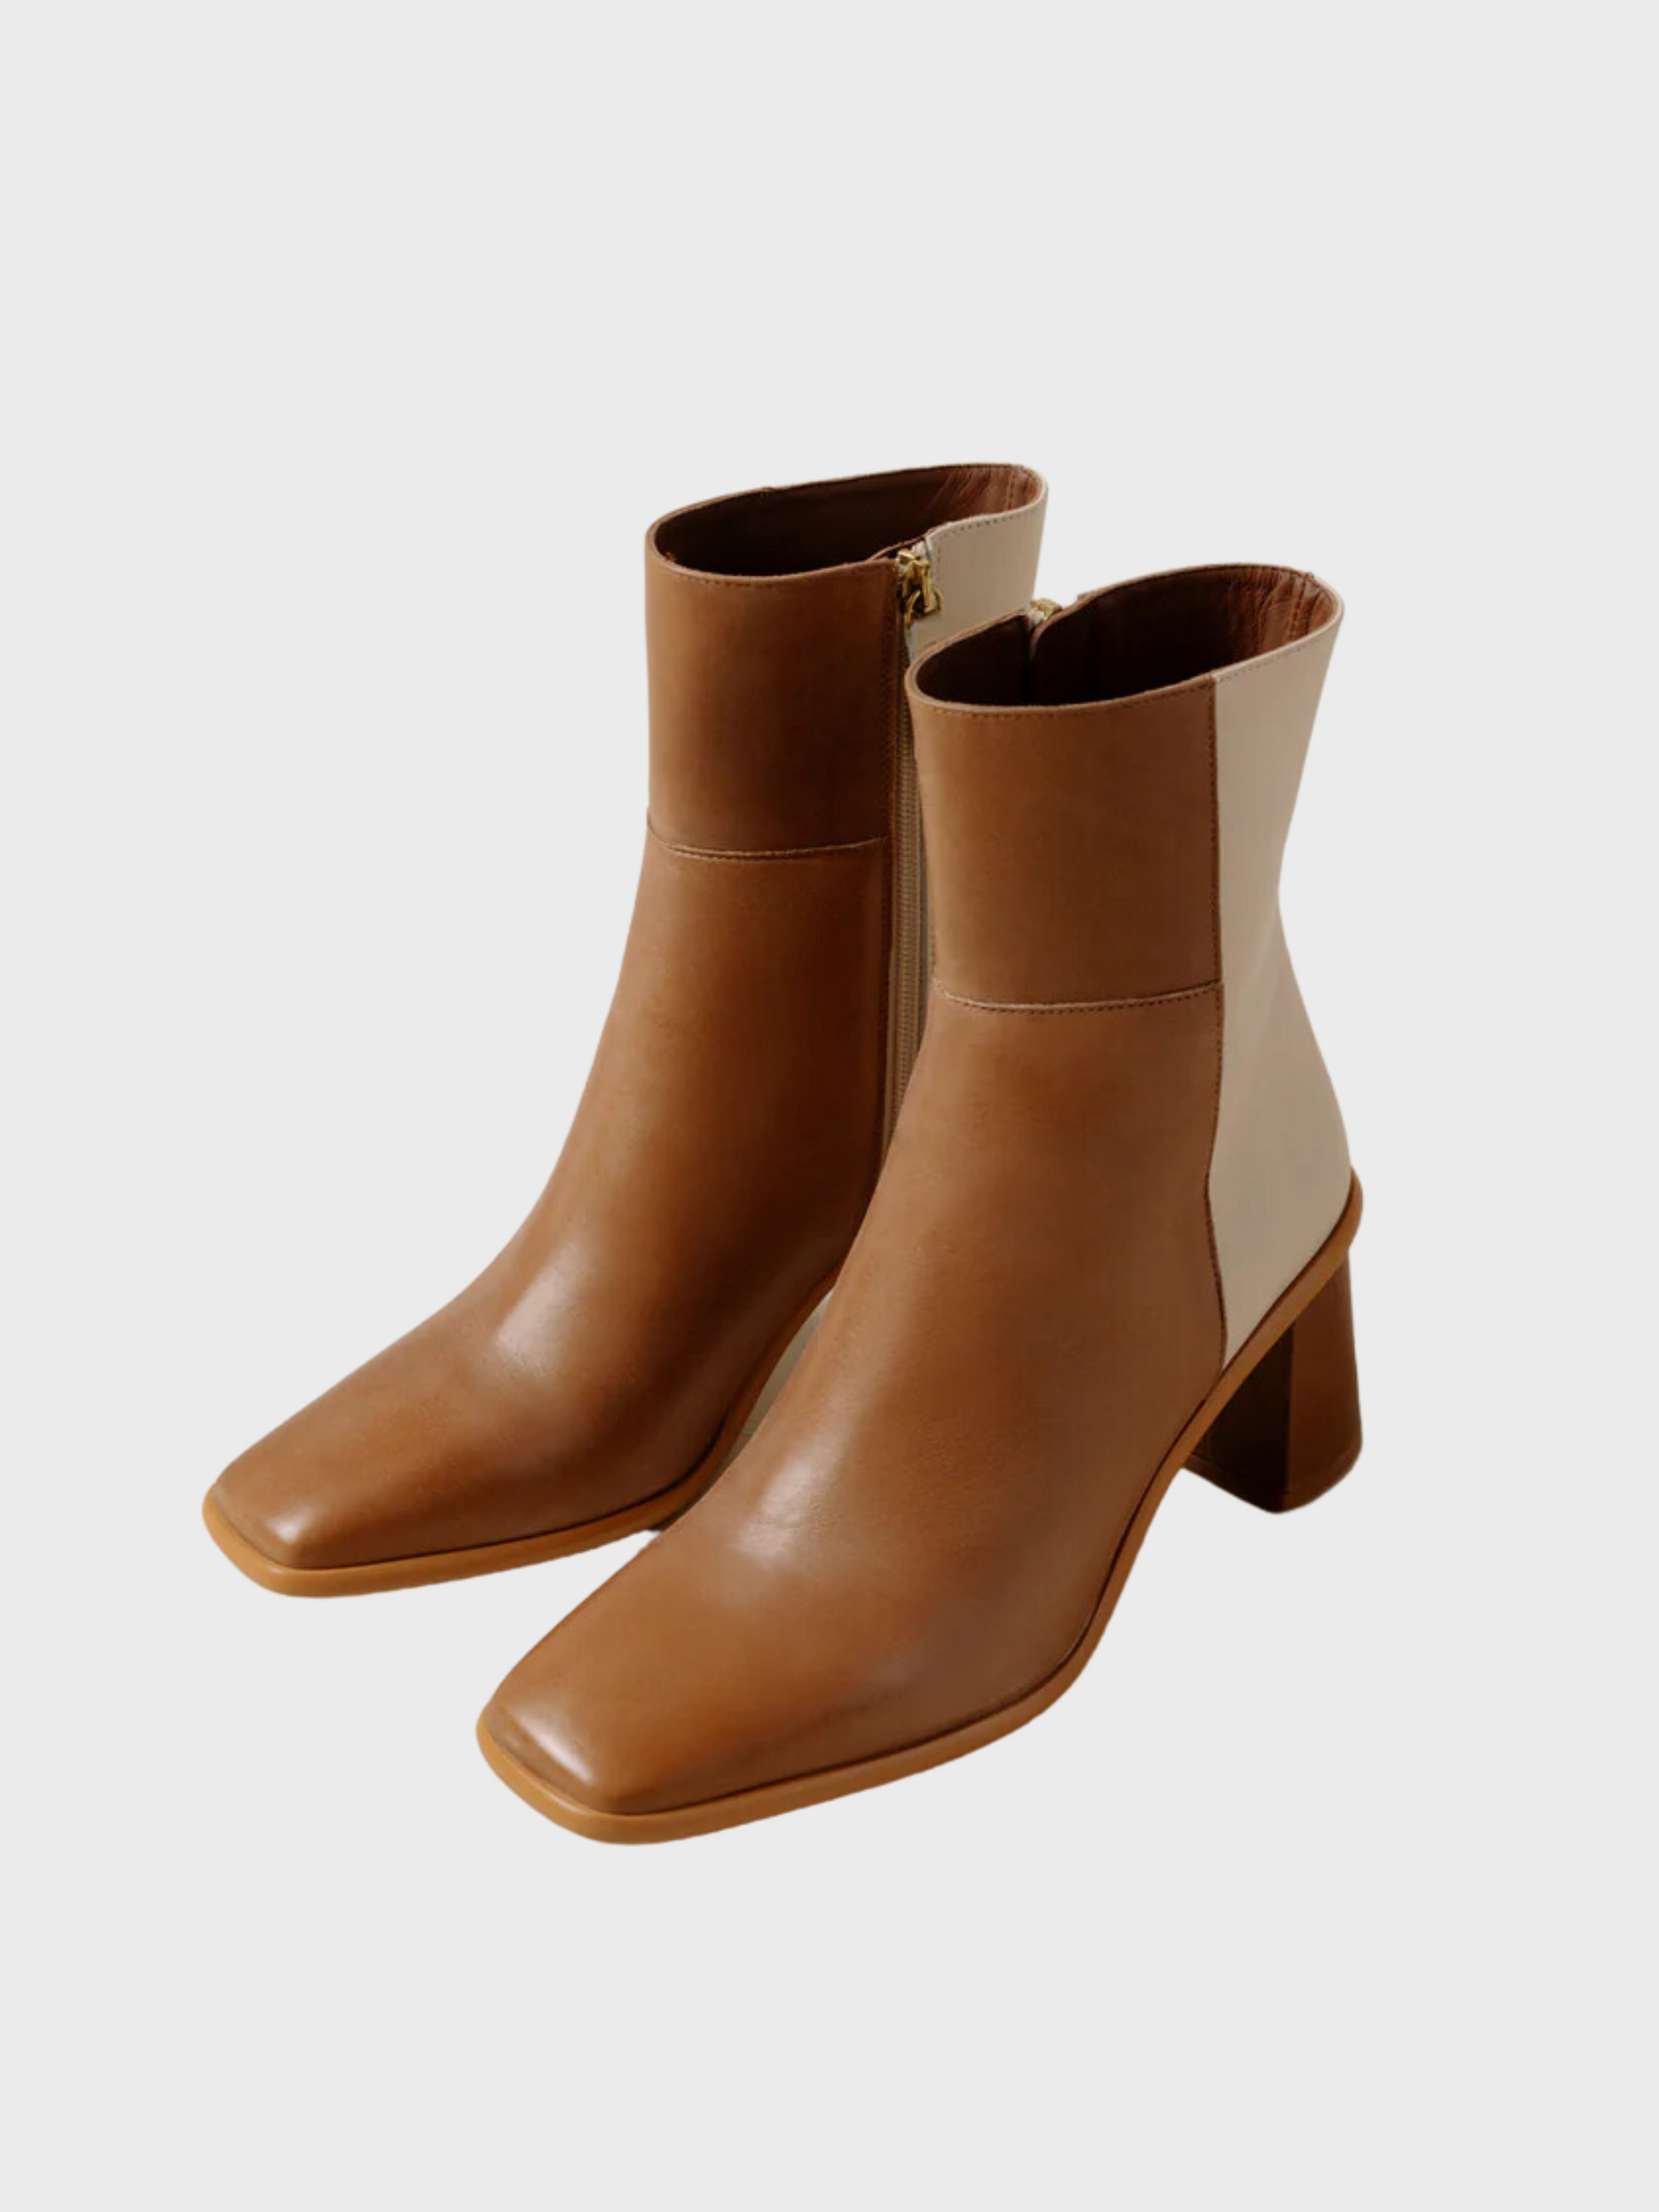 ALOHAS West Ankle Boots Cream Camel